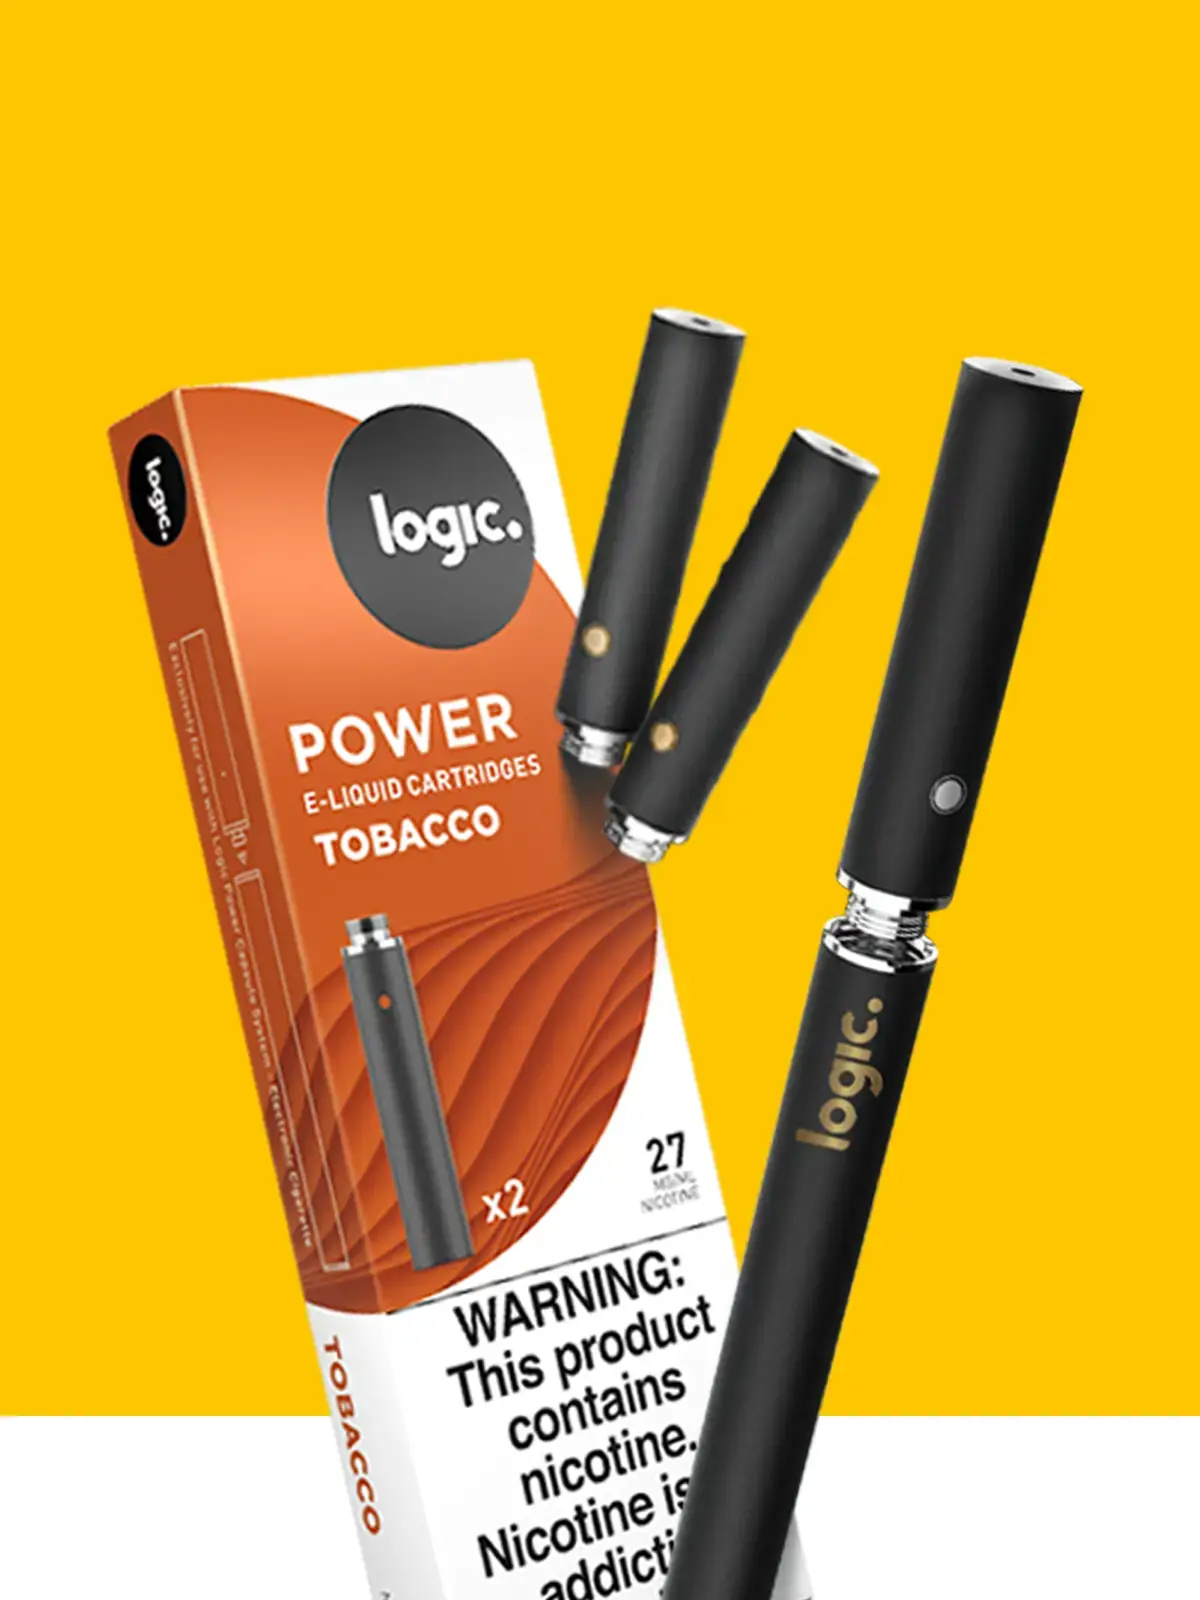 Logic Power device with Logic Power Tobacco refills in front of a yellow background